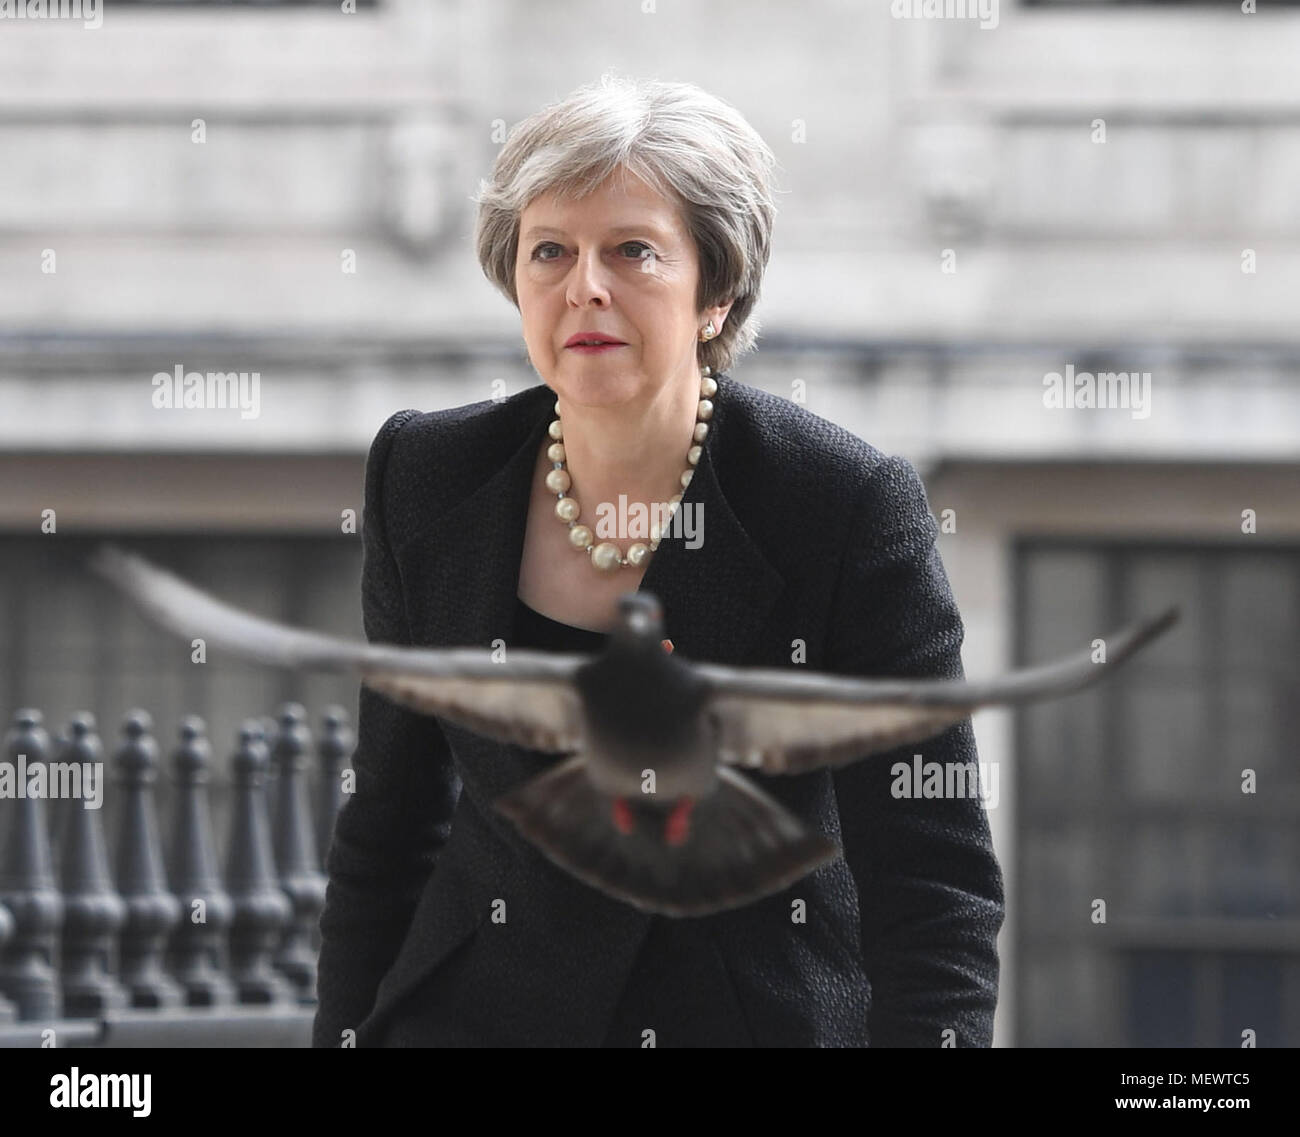 Prime Minister Theresa May arrives at a memorial service at St Martin-in-the-Fields in Trafalgar Square, London, to commemorate the 25th anniversary of the murder of Stephen Lawrence. Stock Photo